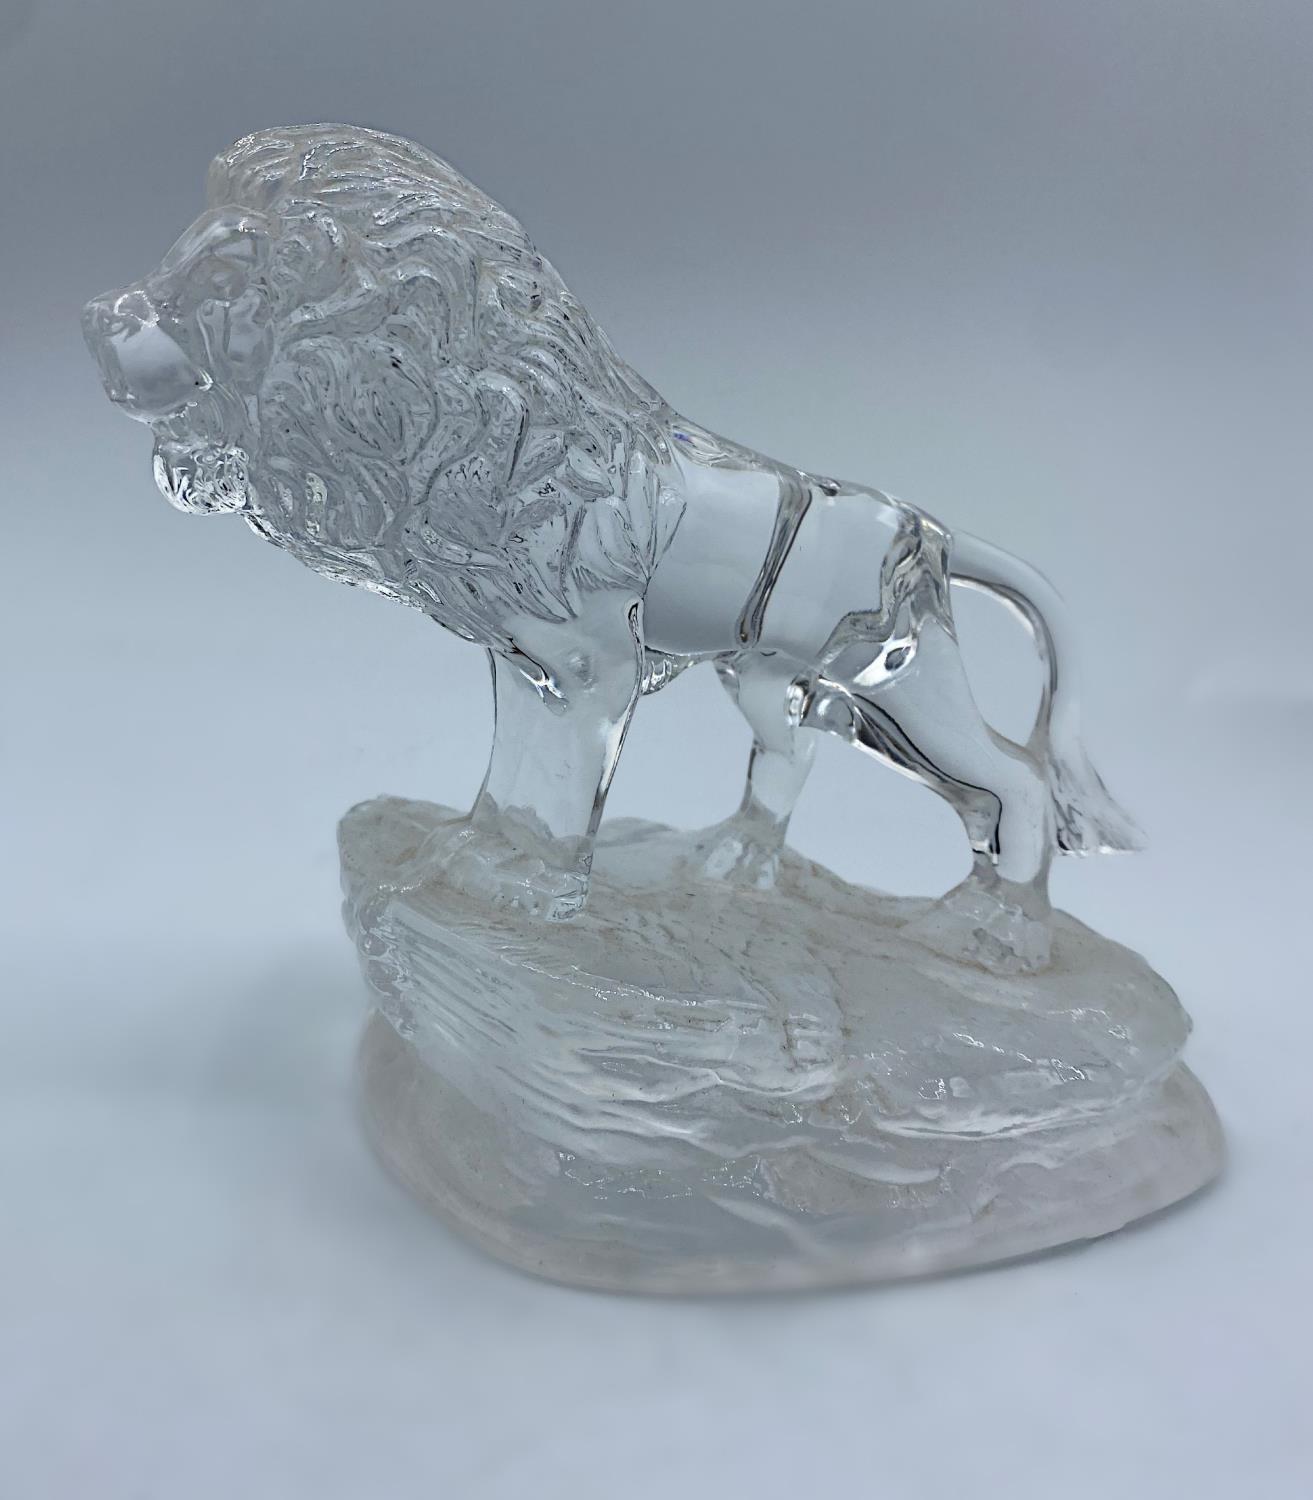 Cristal d'Arques France lead crystal Glass Lion Figure Paperweight in the shape of a Lion, weight